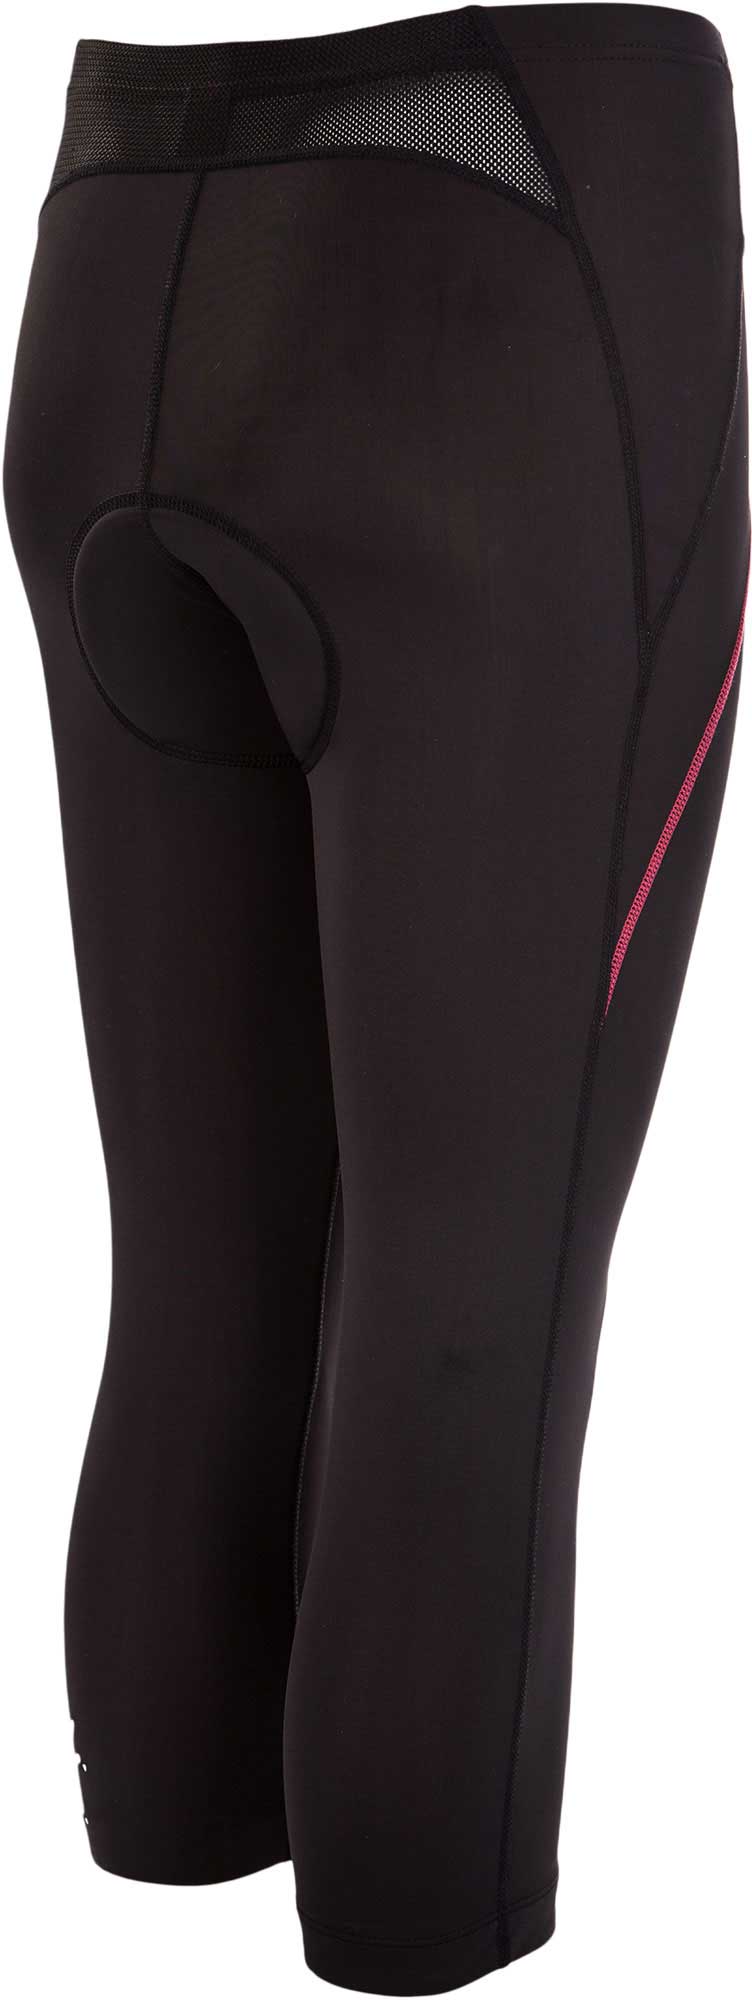 Women's 3/4 cycling tights